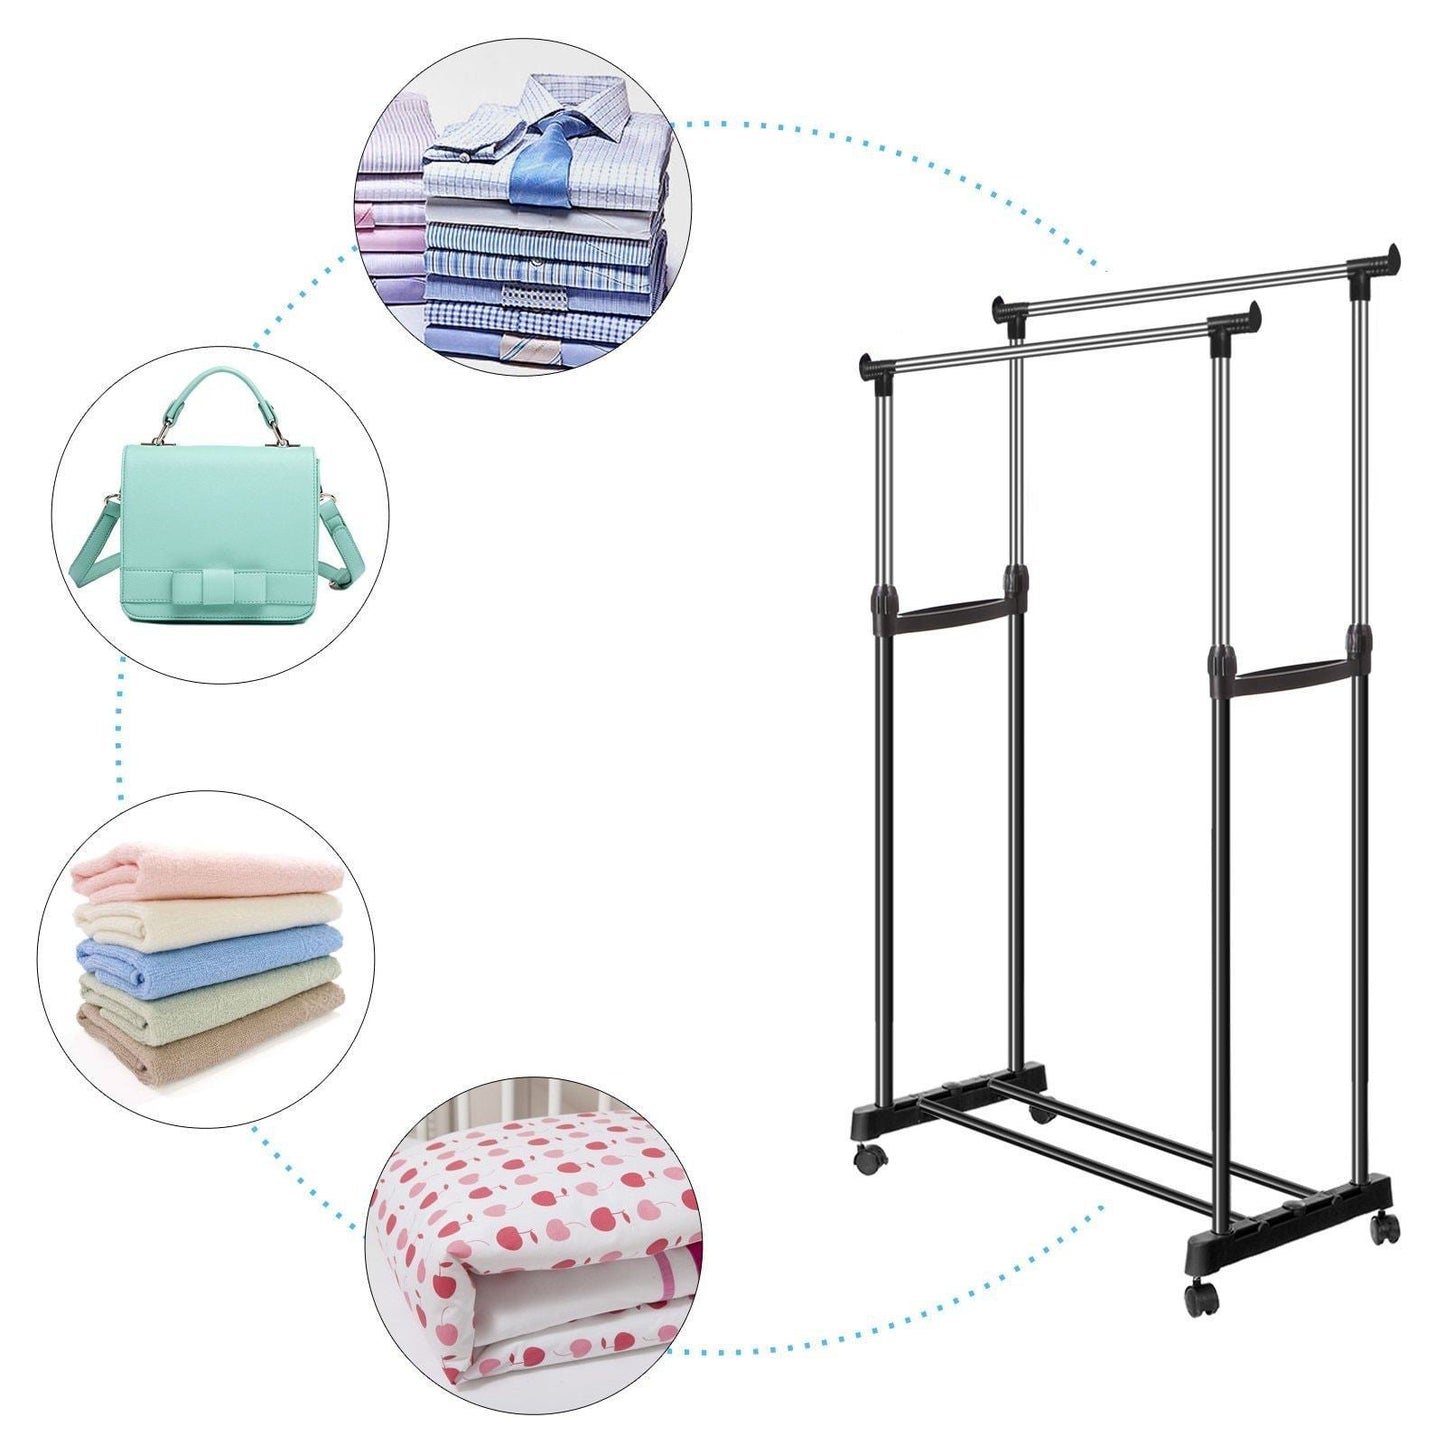 Drying Rack Best Houseware Heavy Duty Double Rail Clothes Laundry Cloth Dryer Laundry Rack For Jacket,Dress,Towels,Shirts